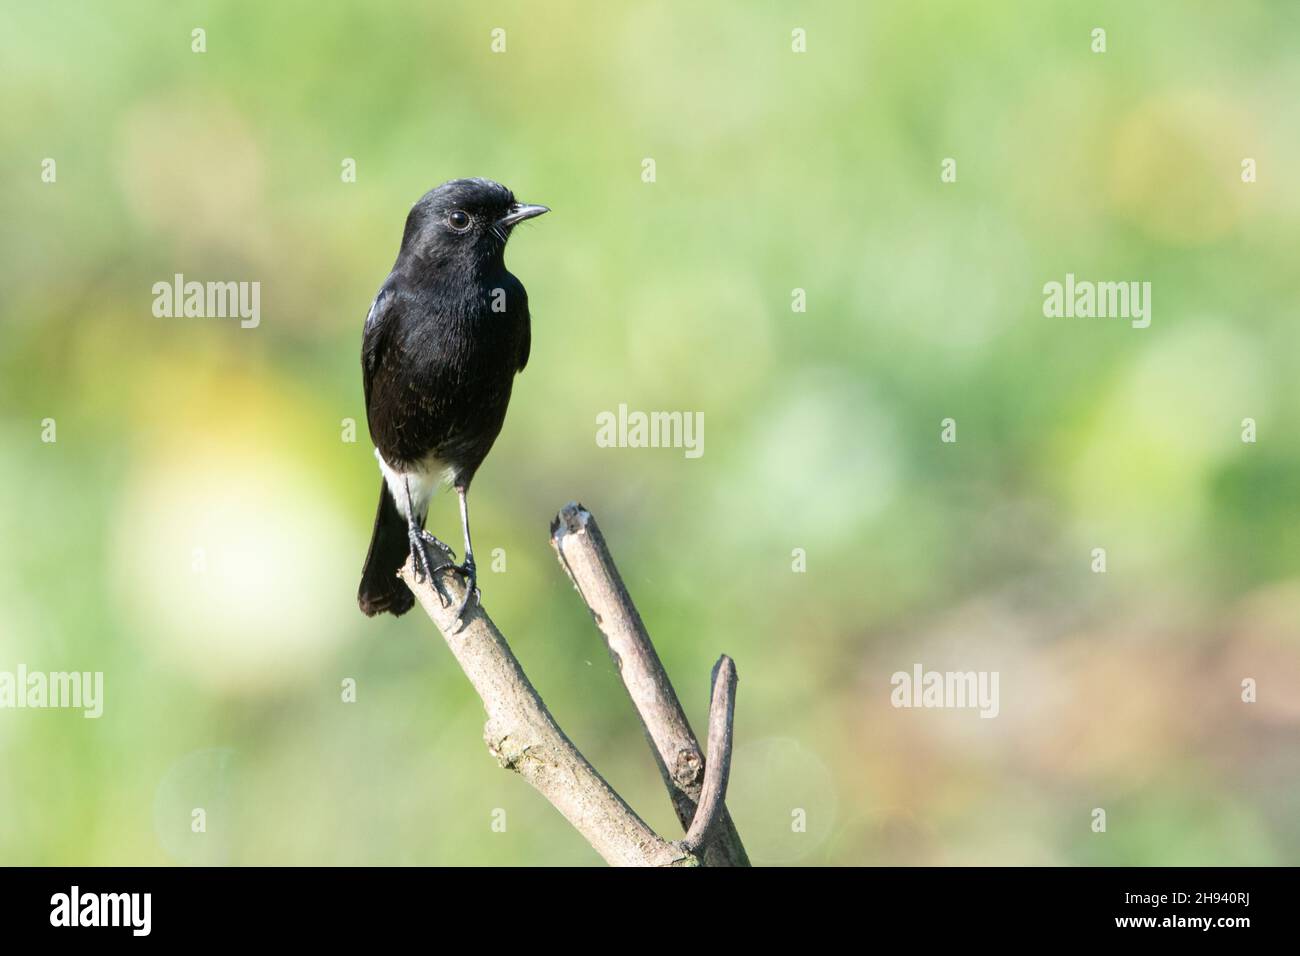 Pied Bushchat (Saxicola caprata). A sedentary “chat” associated with open habitats in tropical and subtropical Asia. Males are black with a white vent Stock Photo